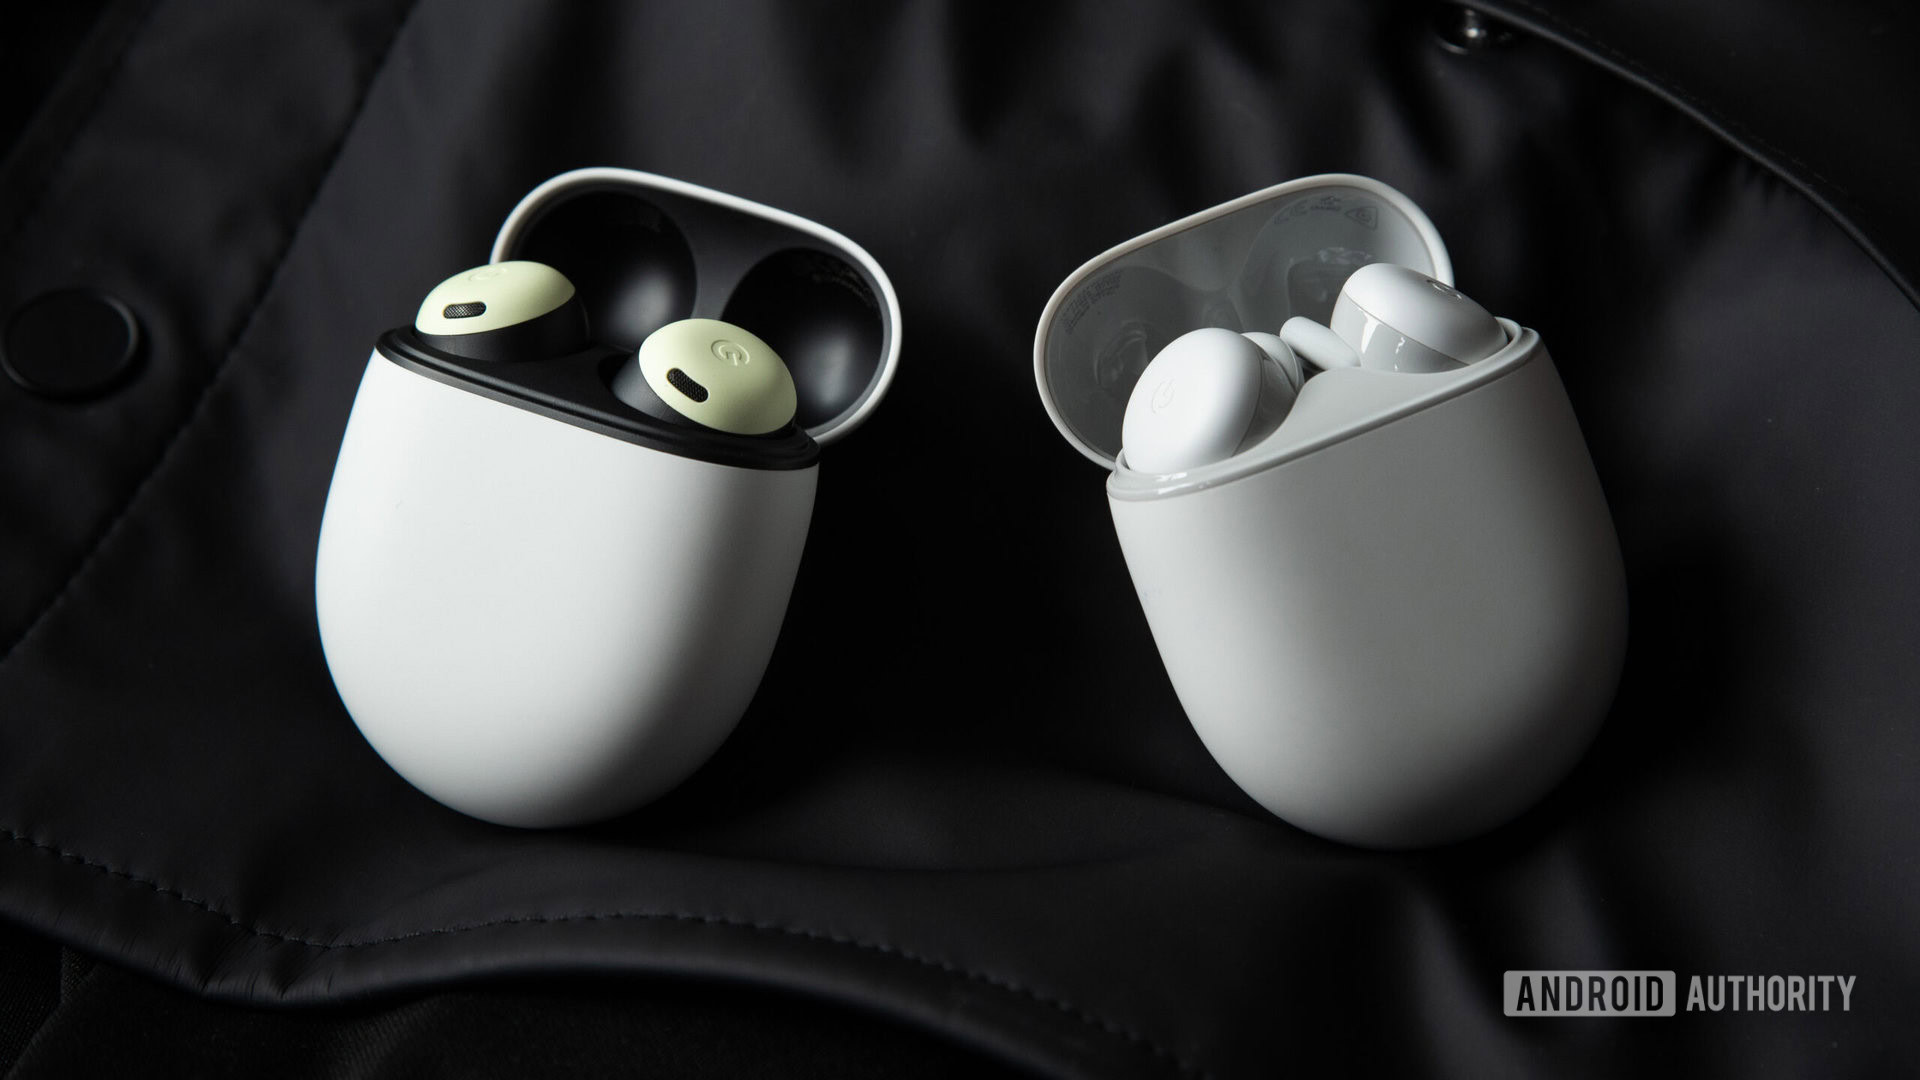 The Google Pixel Buds Pro and Google Pixel Buds A Series wireless earbuds' in their cases.